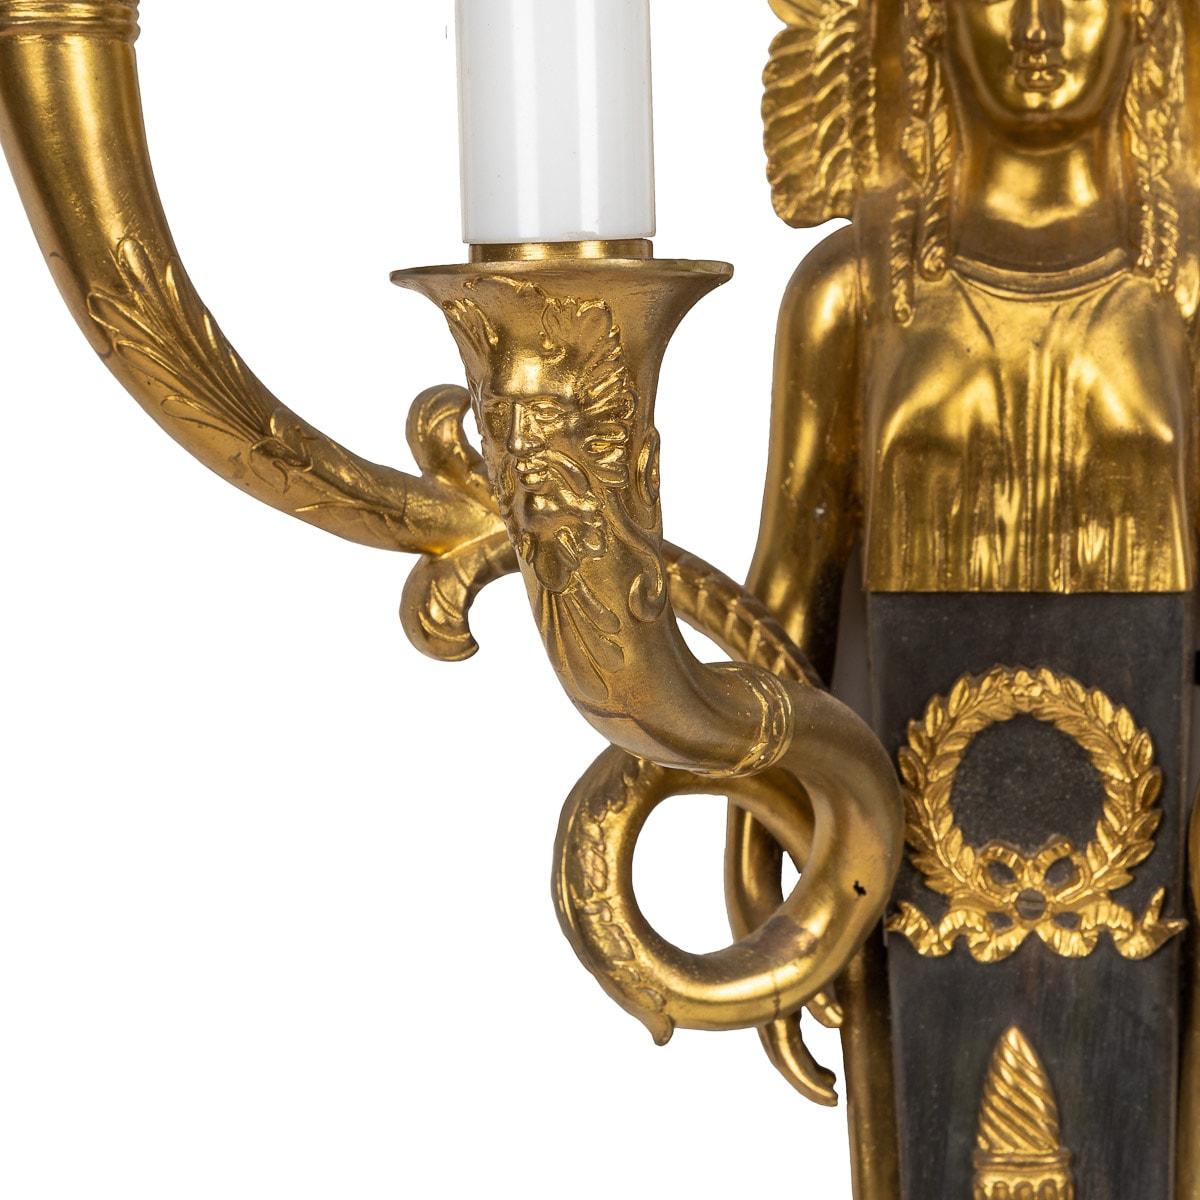 19th Century French Egyptian Revival Part Ormolu D'appliques Wall Lights, c 1830 For Sale 4